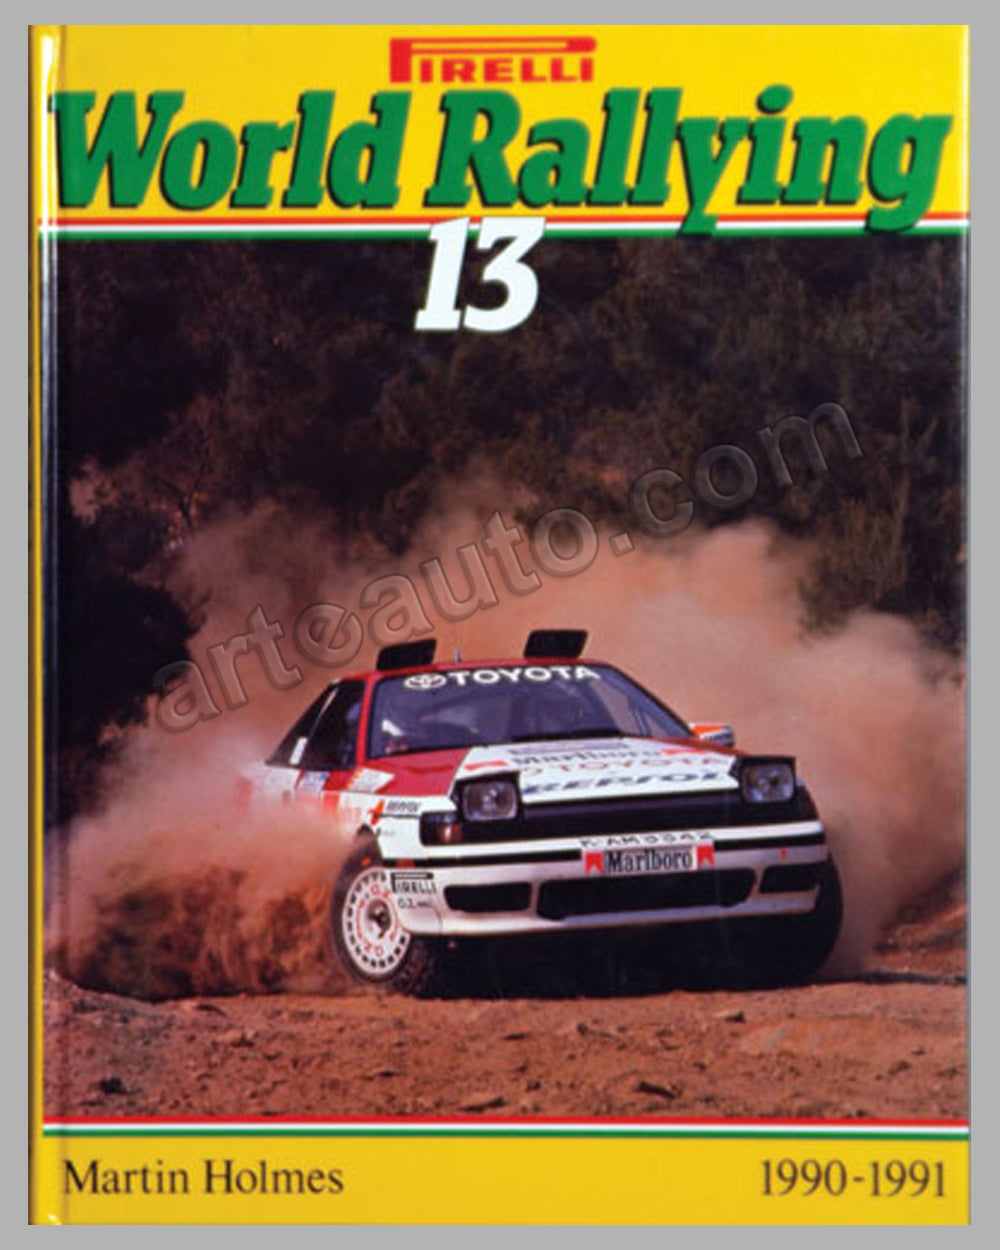 World Rallying #13 1990-91 book by M. Holmes